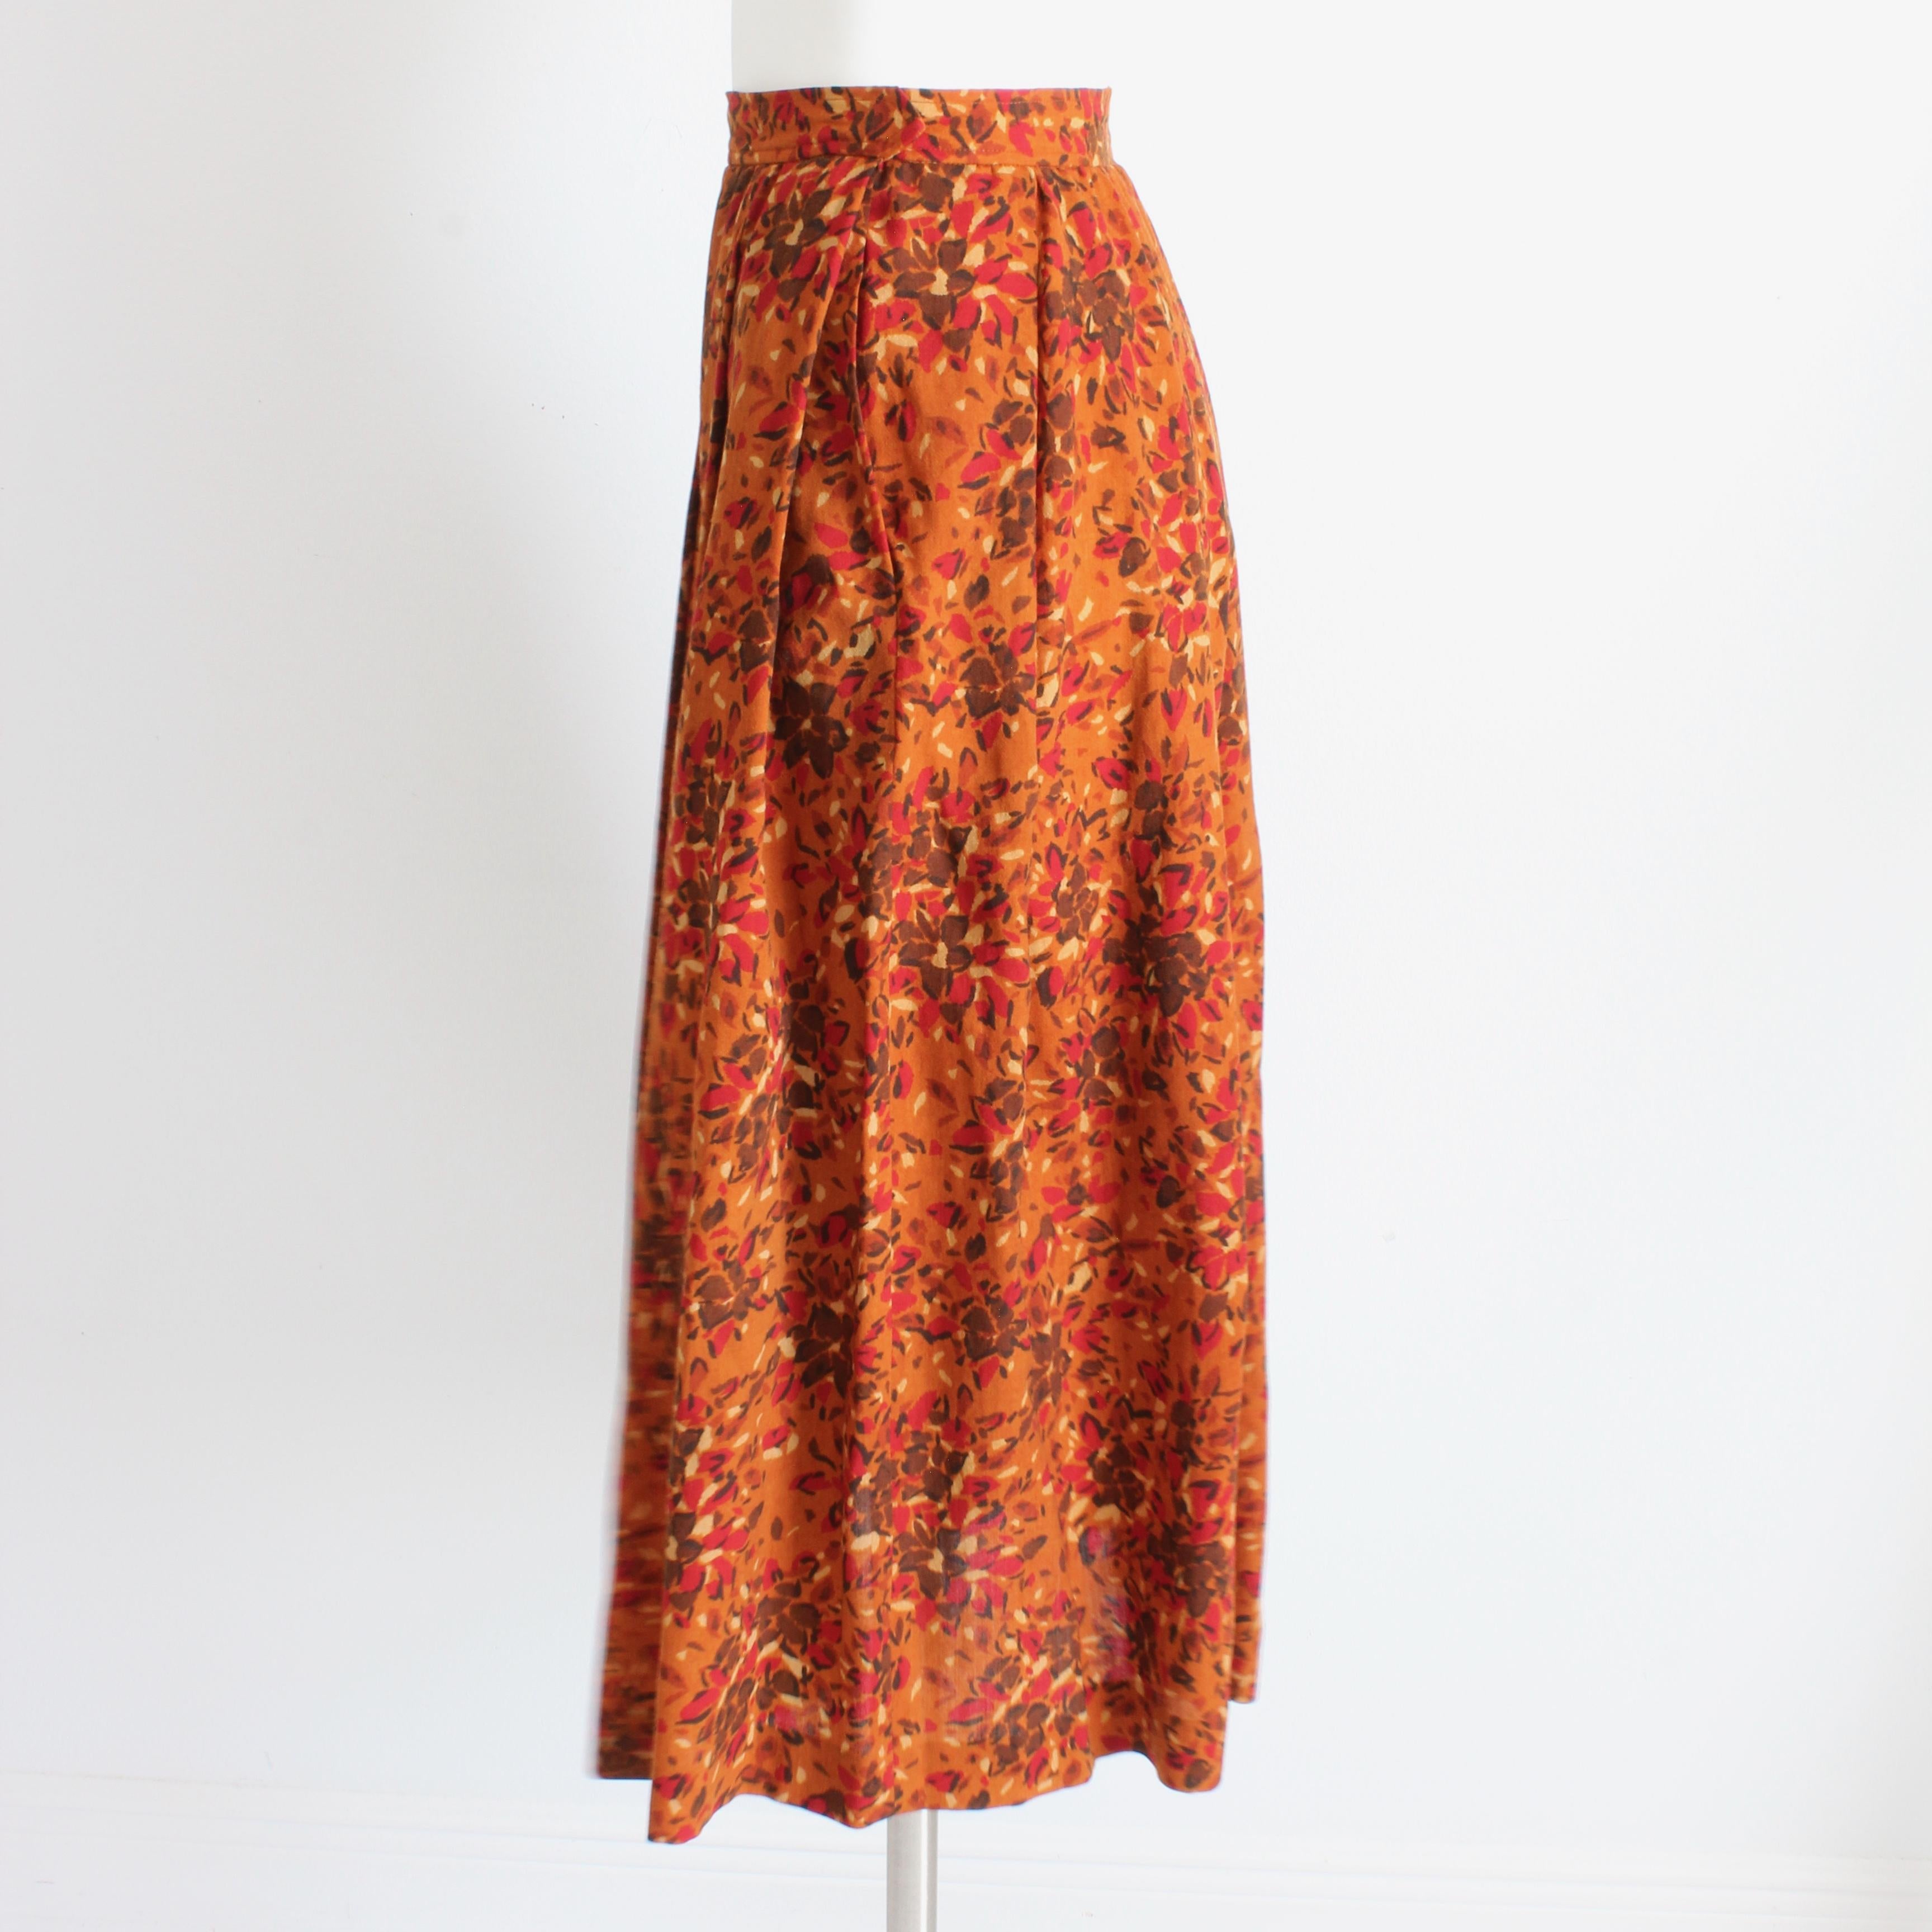 Yves Saint Laurent Skirt Pleated A-Line Floral Print Wool Size 38 Vintage 80s In Good Condition For Sale In Port Saint Lucie, FL